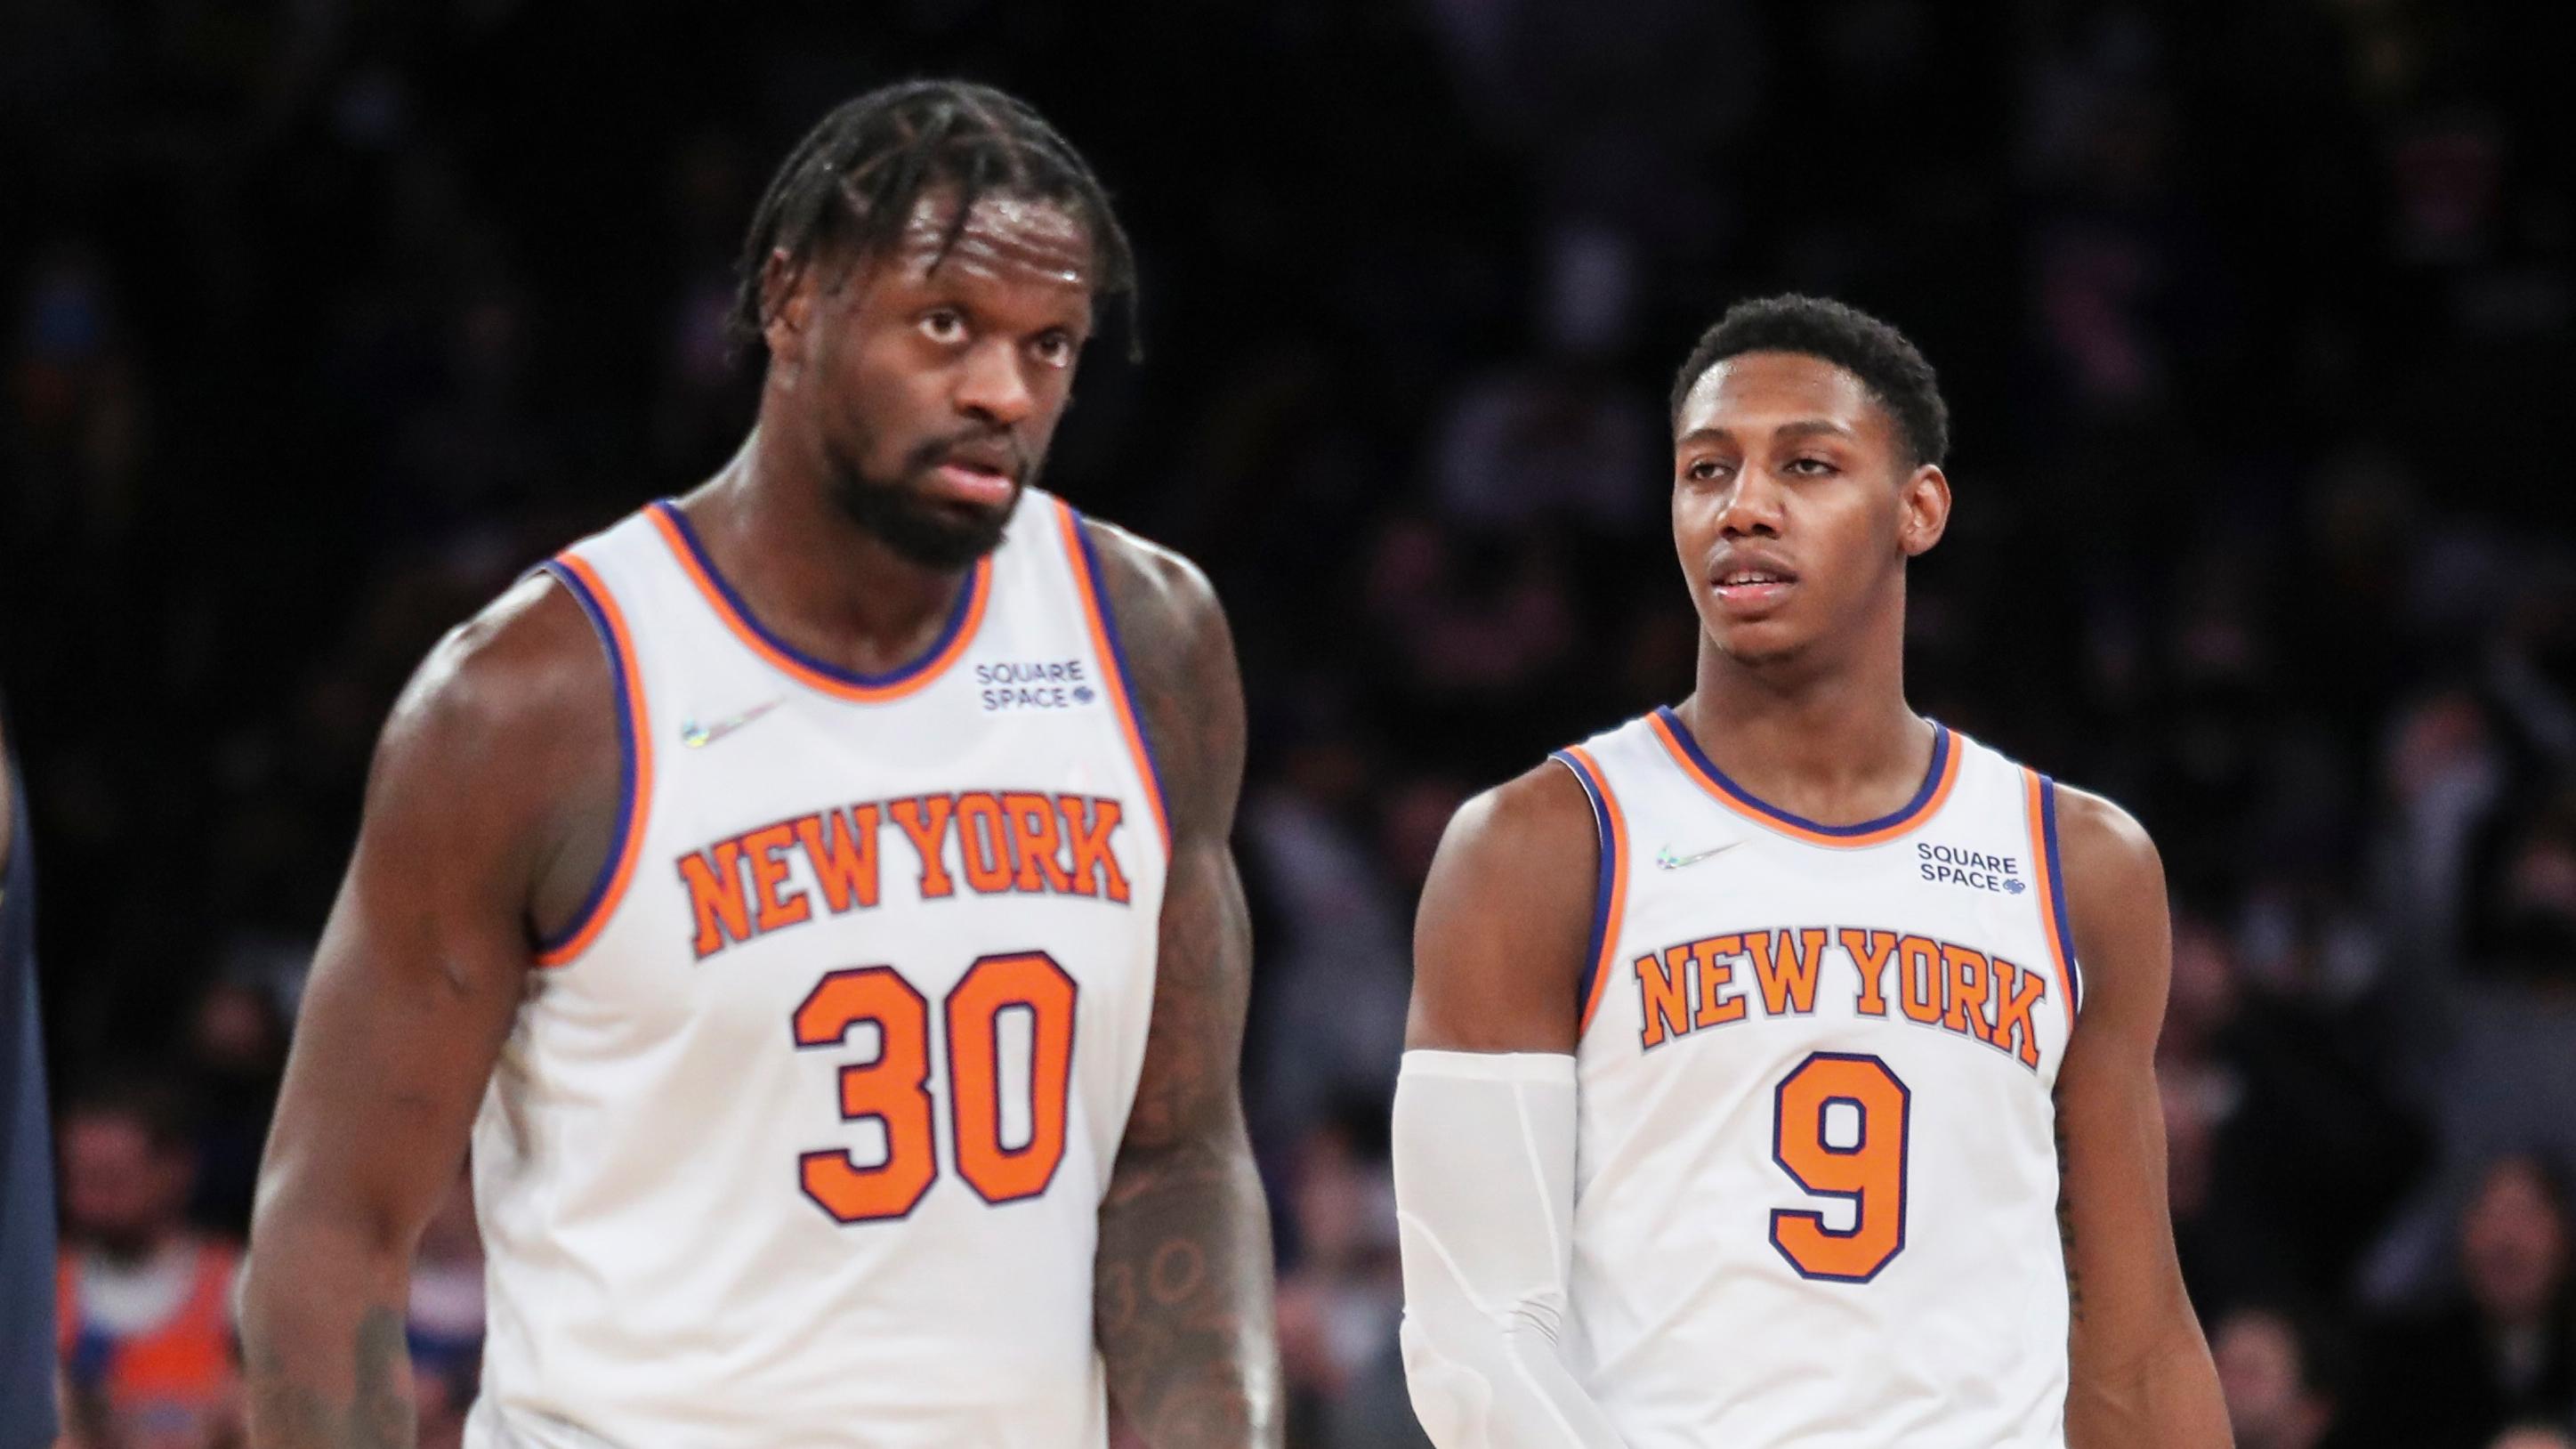 Jan 4, 2022; New York, New York, USA; New York Knicks forward Julius Randle (30) and guard RJ Barrett (9) walk off the court together after defeating the Indiana Pacers 104-94 at Madison Square Garden. / Wendell Cruz-USA TODAY Sports